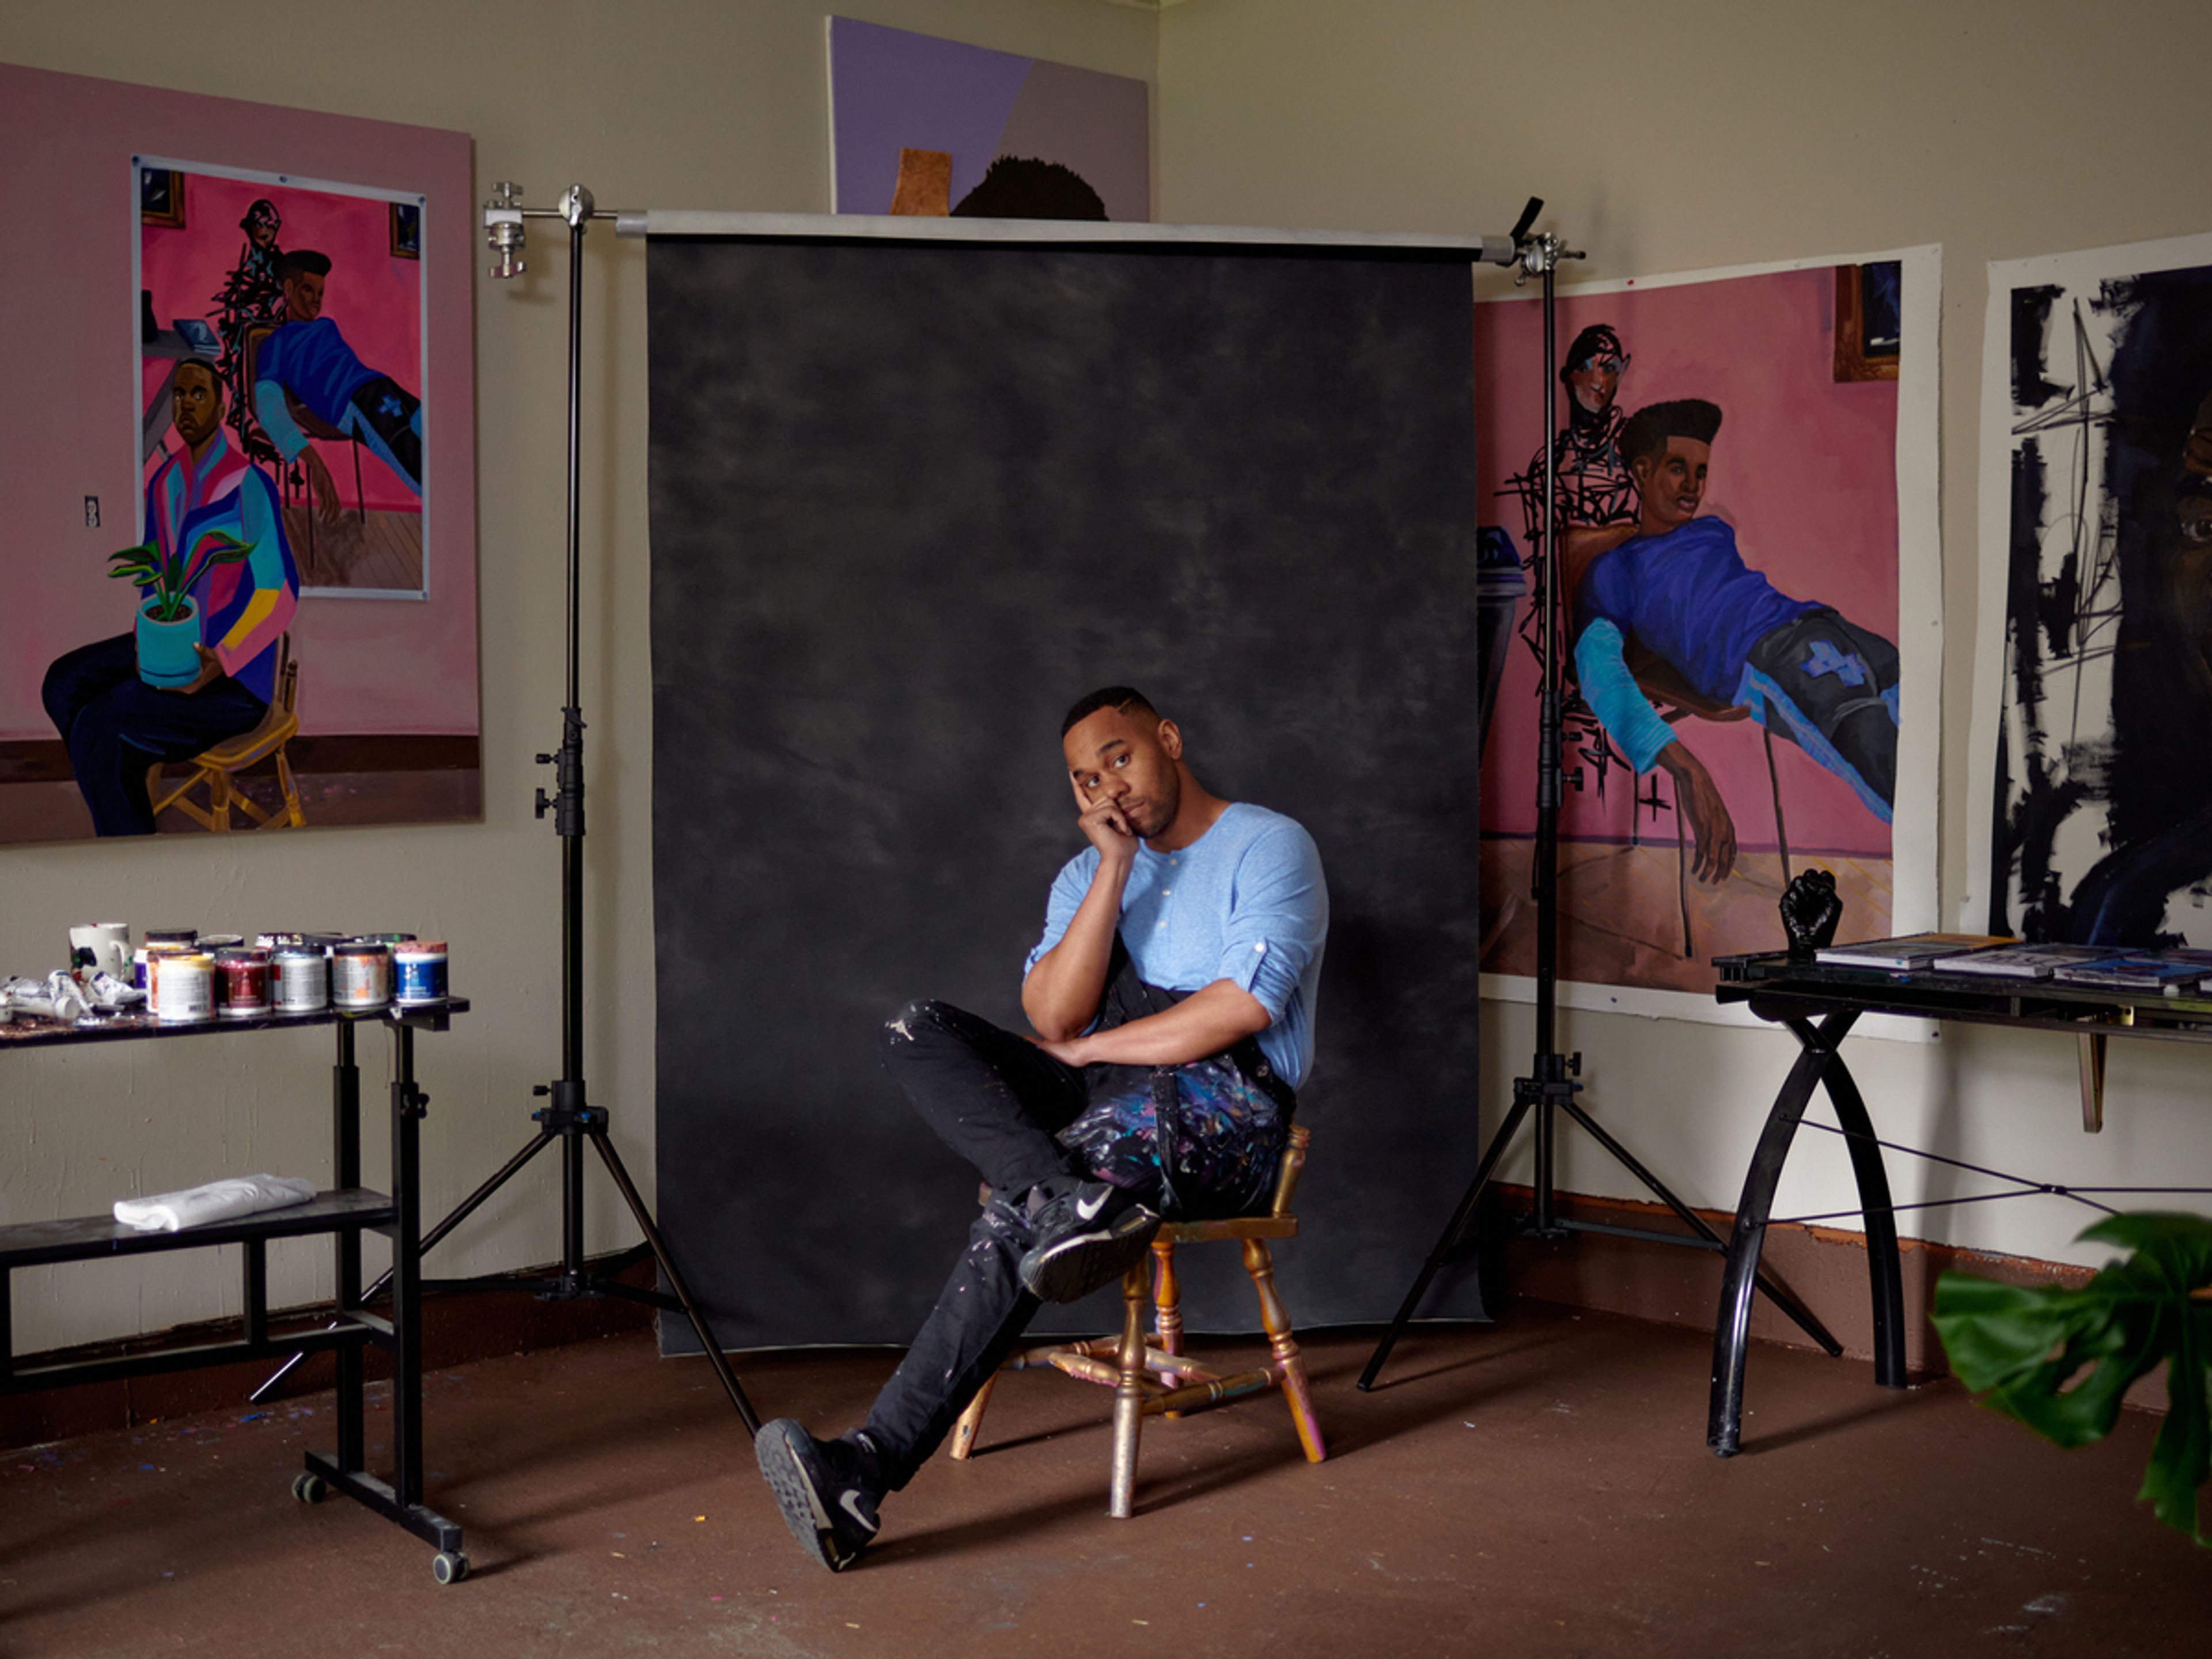 Person on chair in front of black screen, paintings in pink and other bright colors hang on the wall